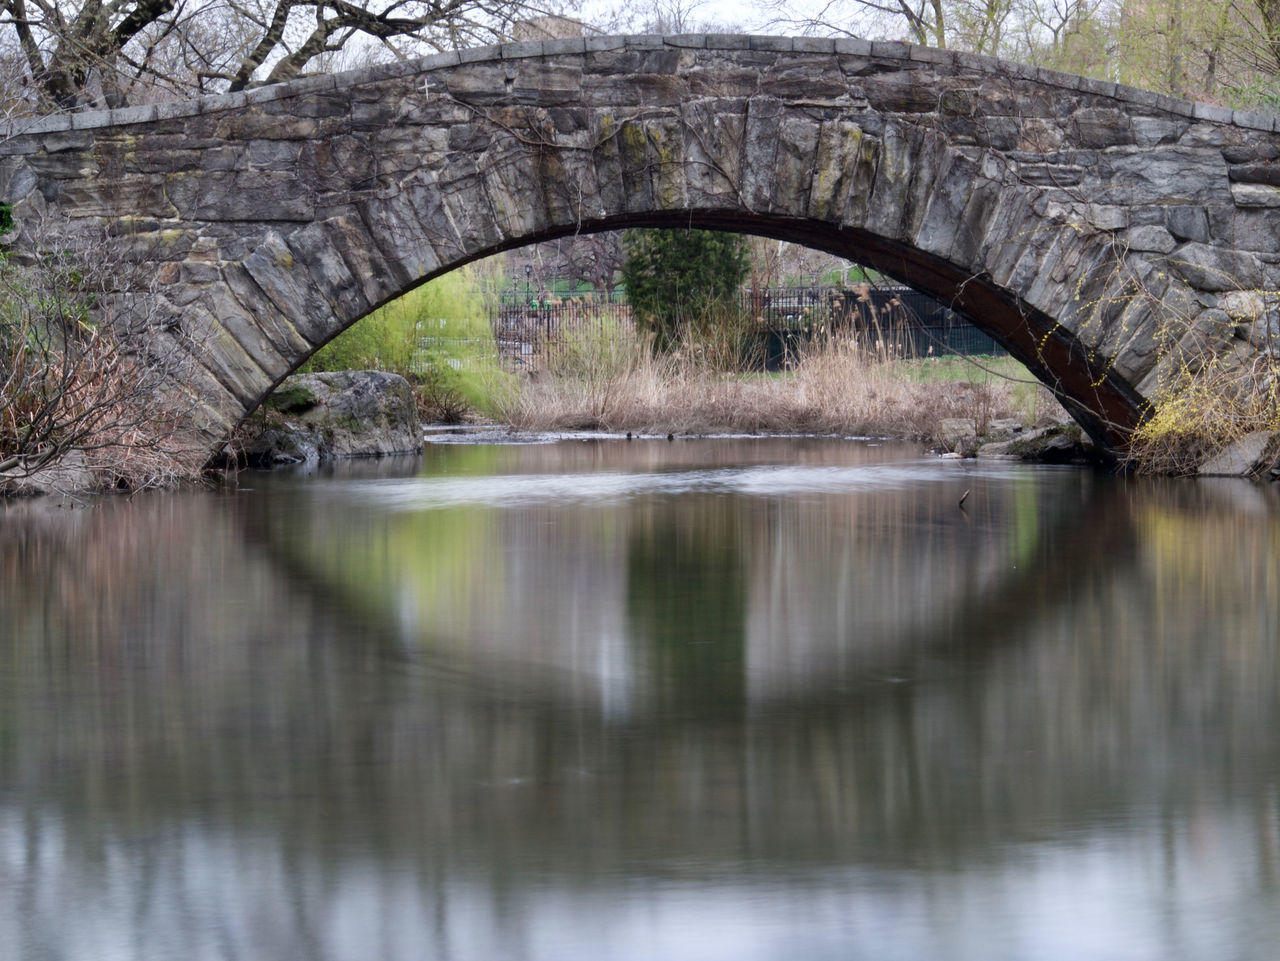 ARCH BRIDGE OVER RIVER BY TREES